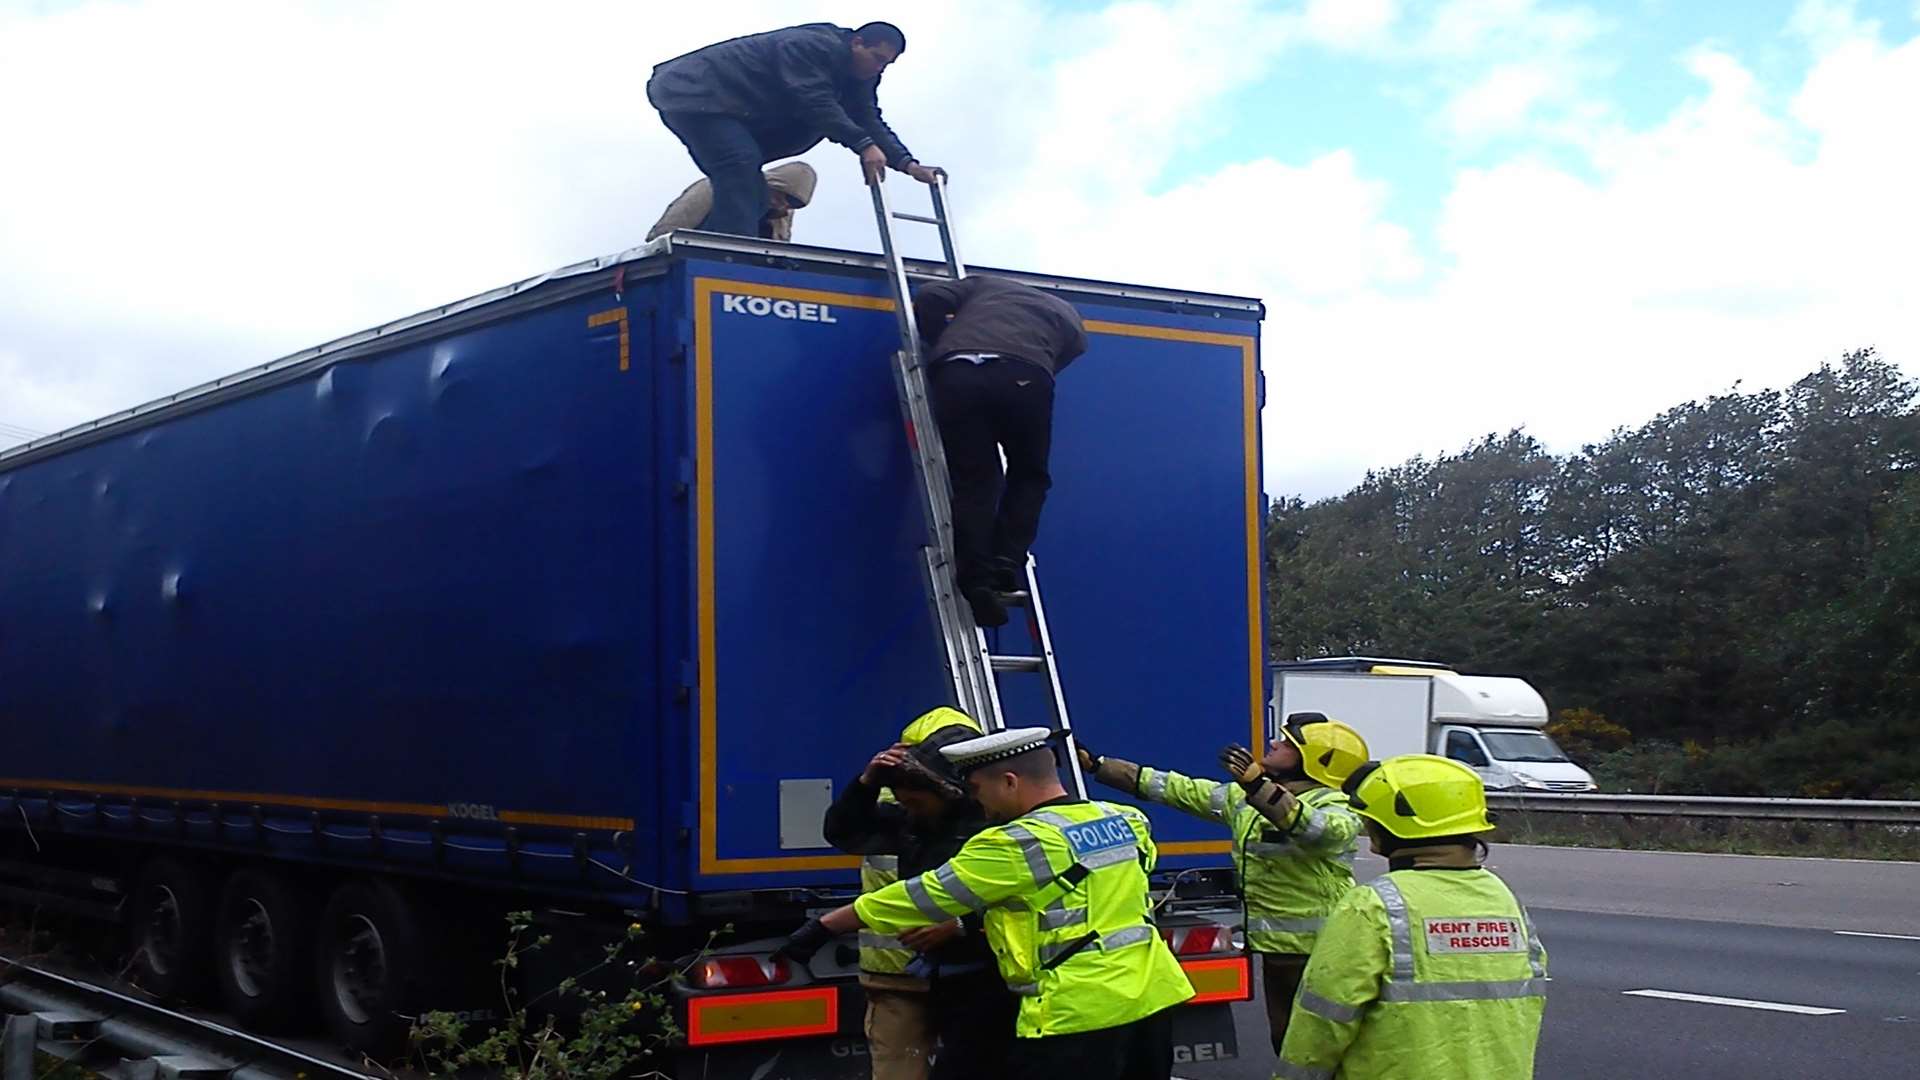 Firefighters helped the men down from the top of the lorry. Picture: Andy Rickwood